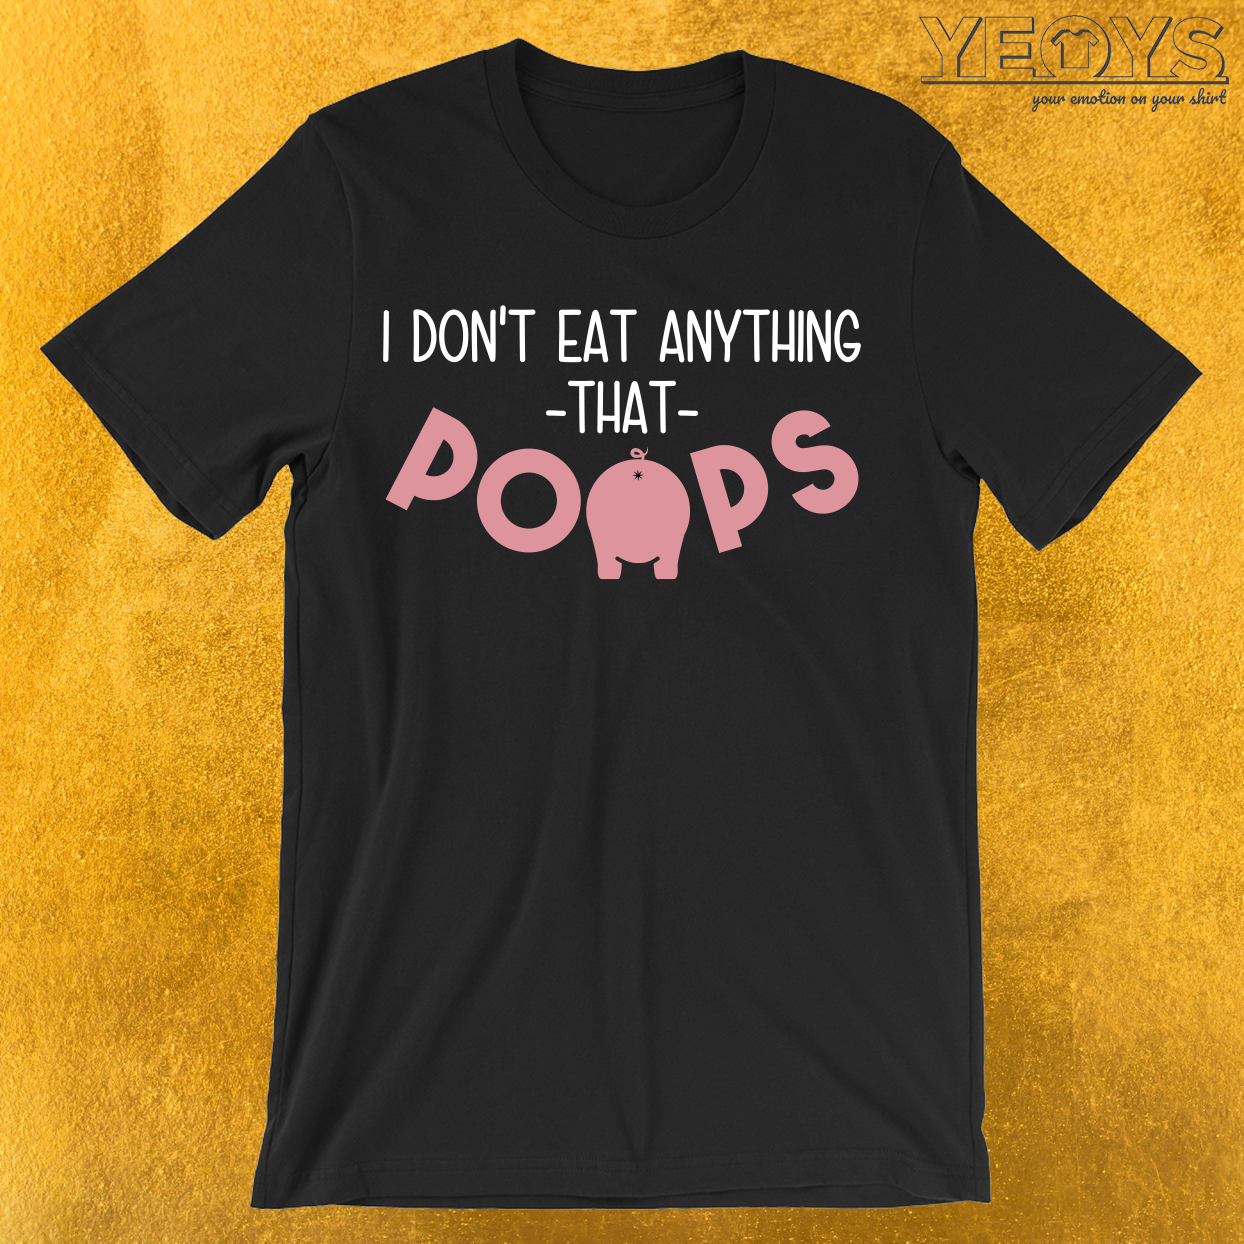 I Don’t Eat Anything That Poops T-Shirt